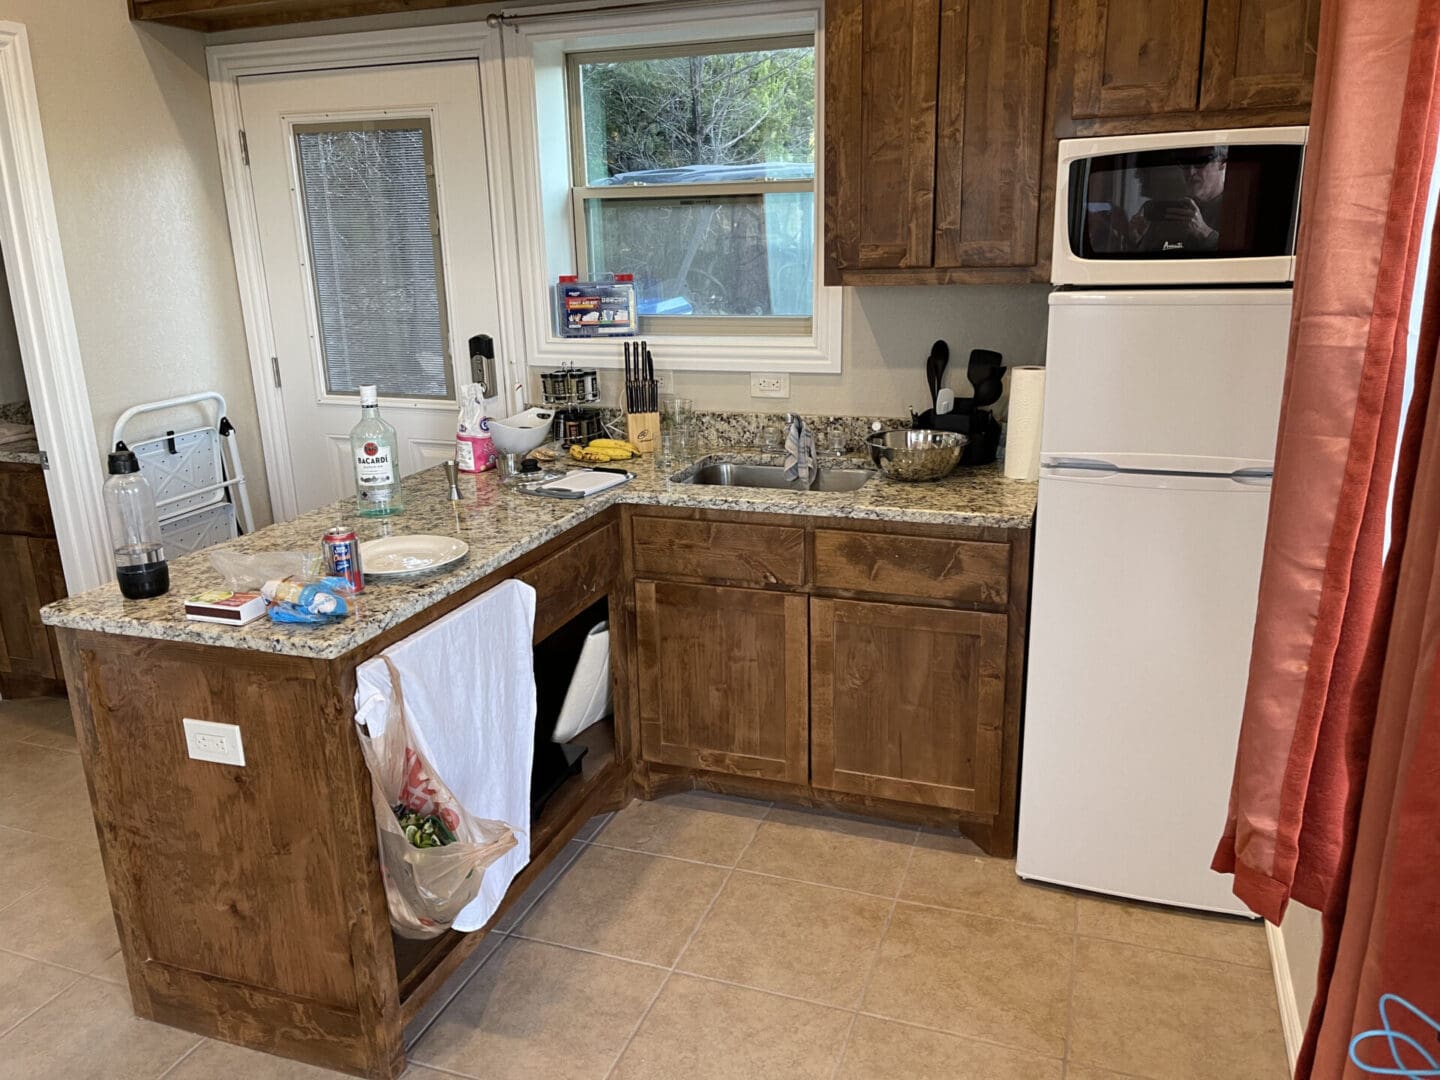 A kitchen with brown cabinets and white appliances.